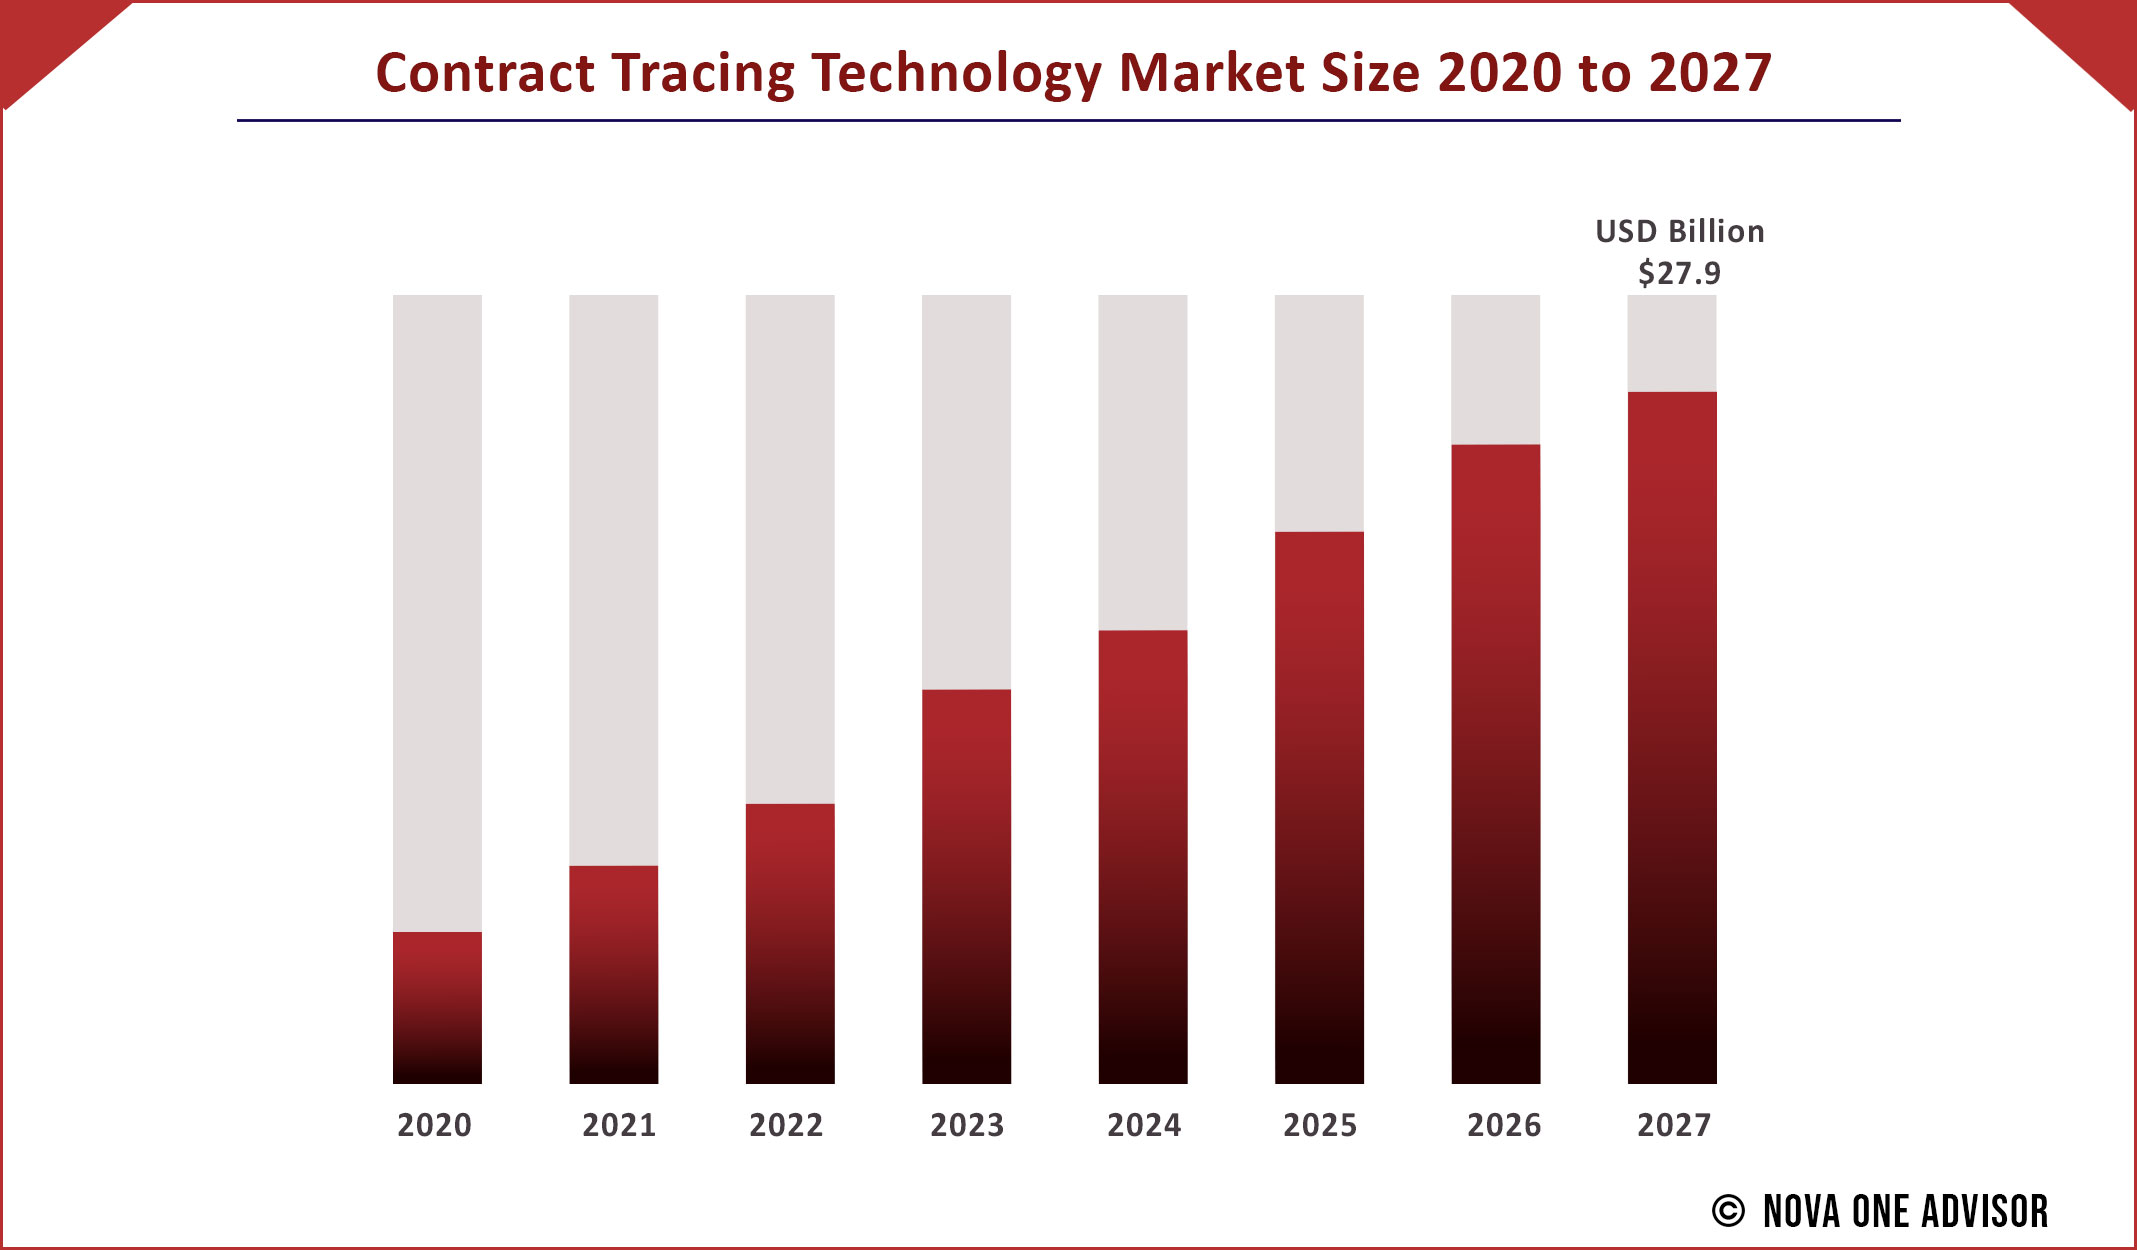 Contract Tracing Technology Market Size 2020 to 2027